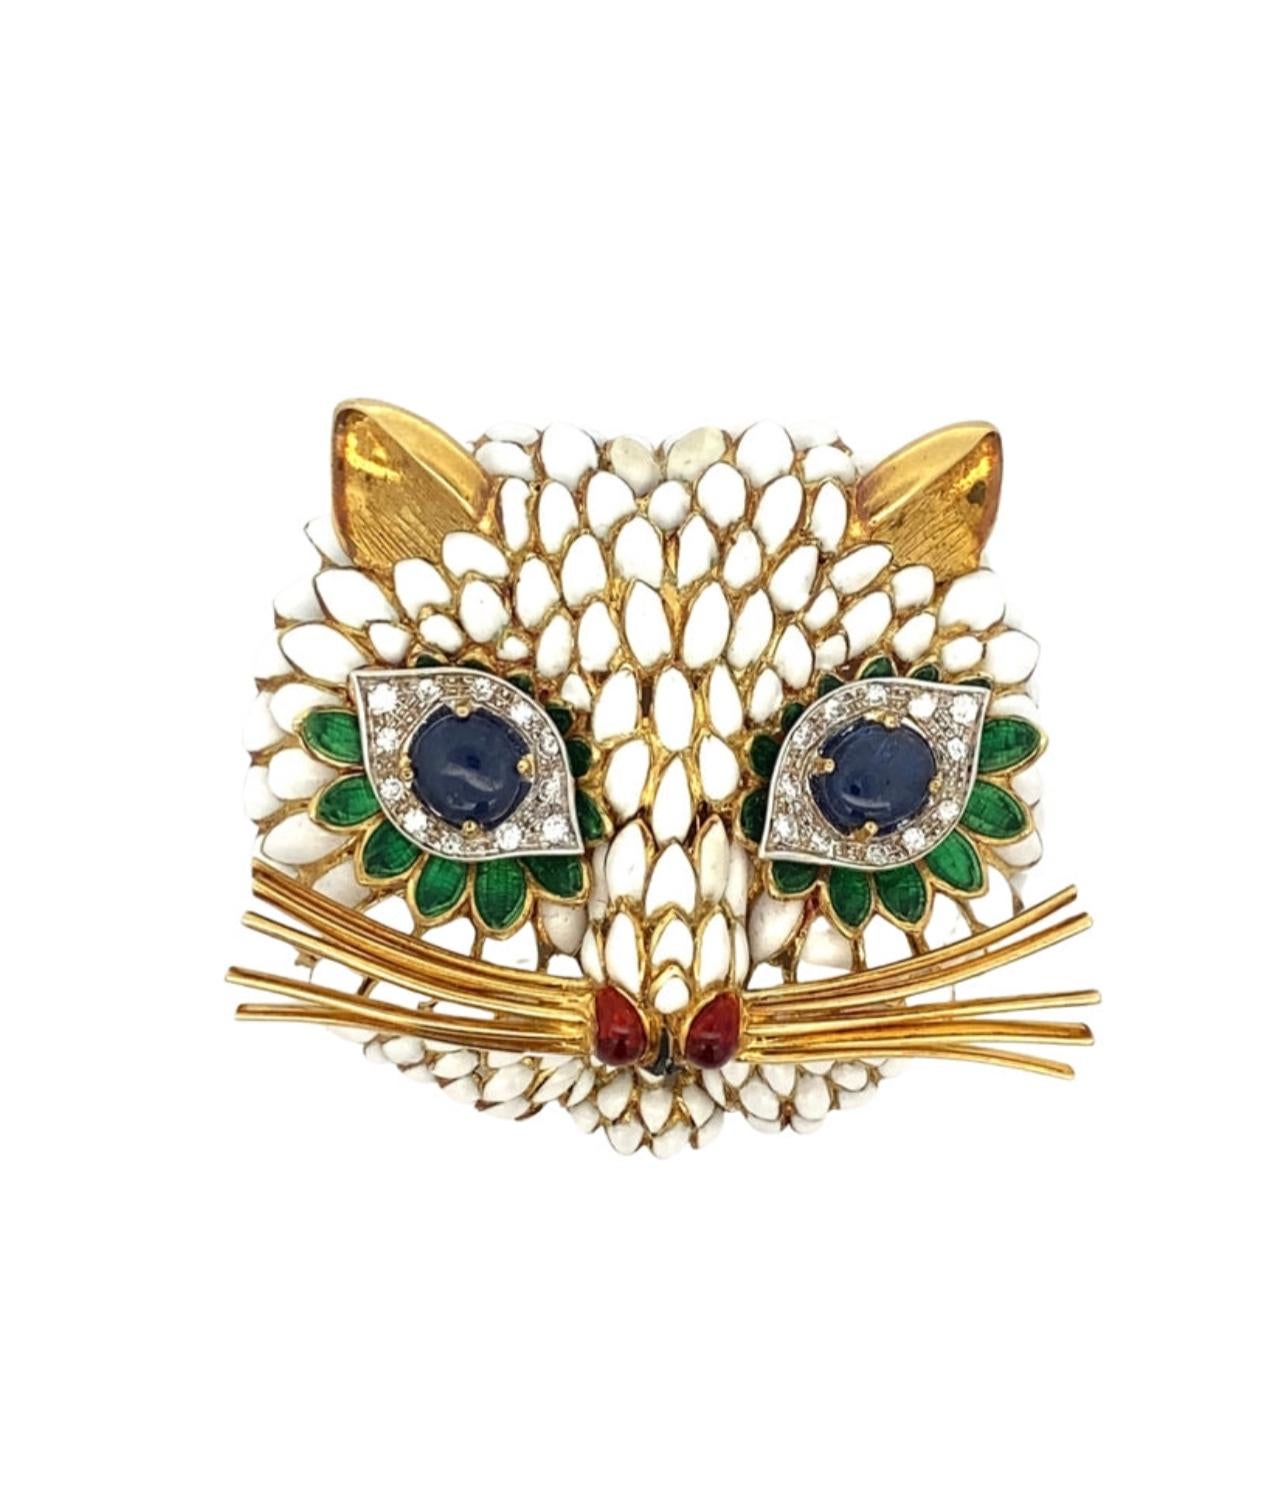 This extraordinary, Italian designer Lunati Gioielli, Cat brooch will captivate with its vintage design and exquisite craftsmanship. Its cabochon sapphire eyes, white, green and red enamel and 18K yellow gold combine to create a truly unique and